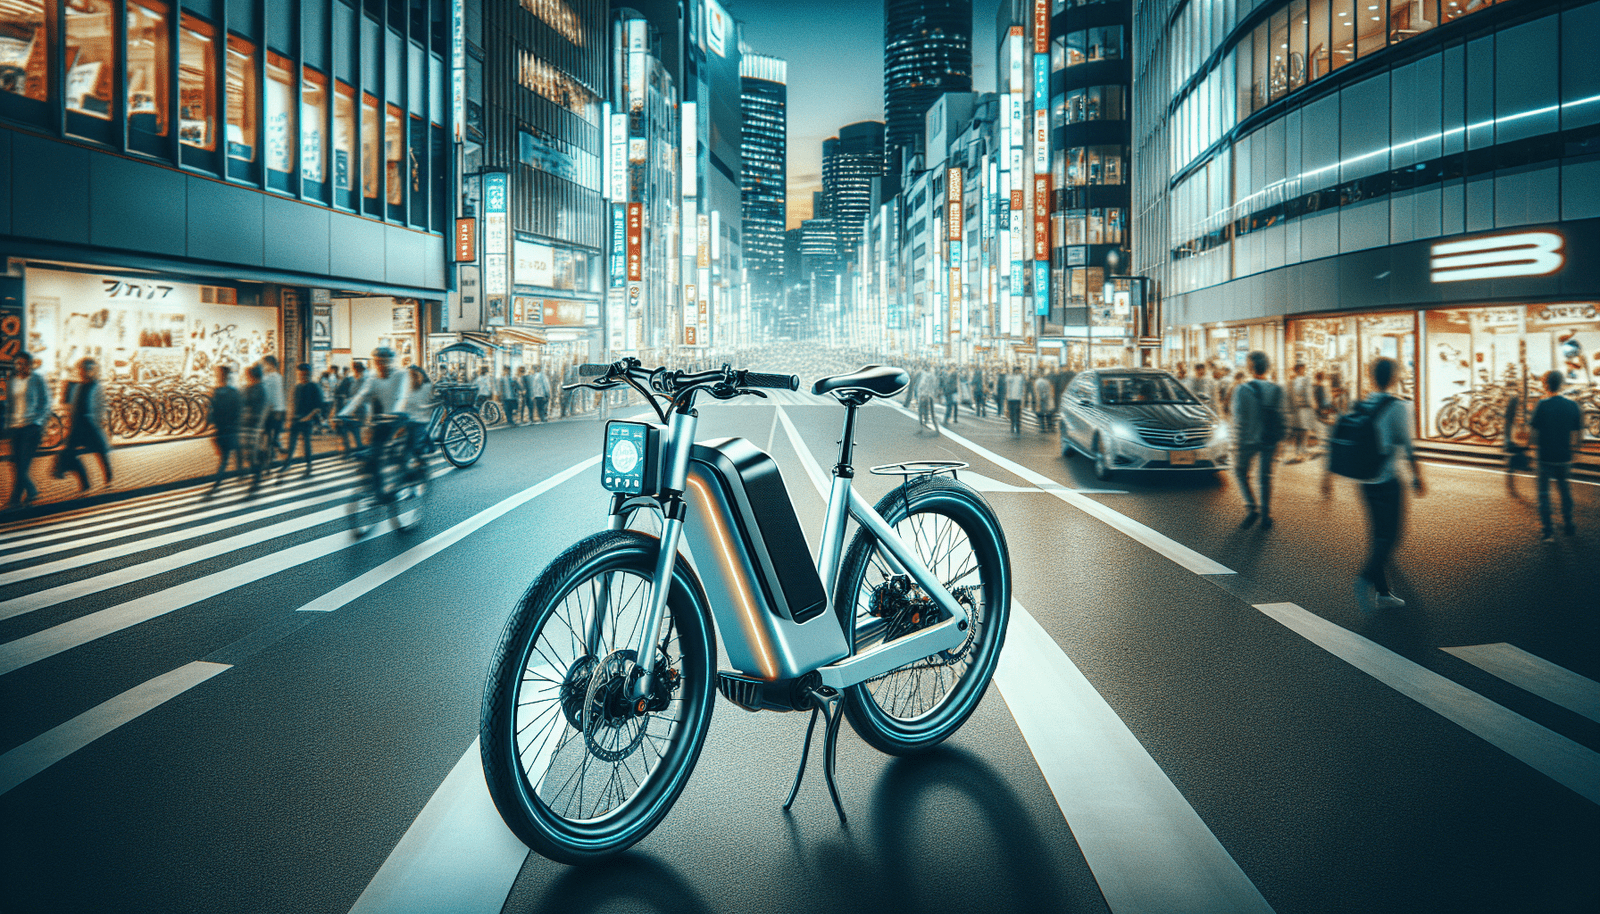 Are There Specific Rules For Electric Bike Usage In Urban Areas?